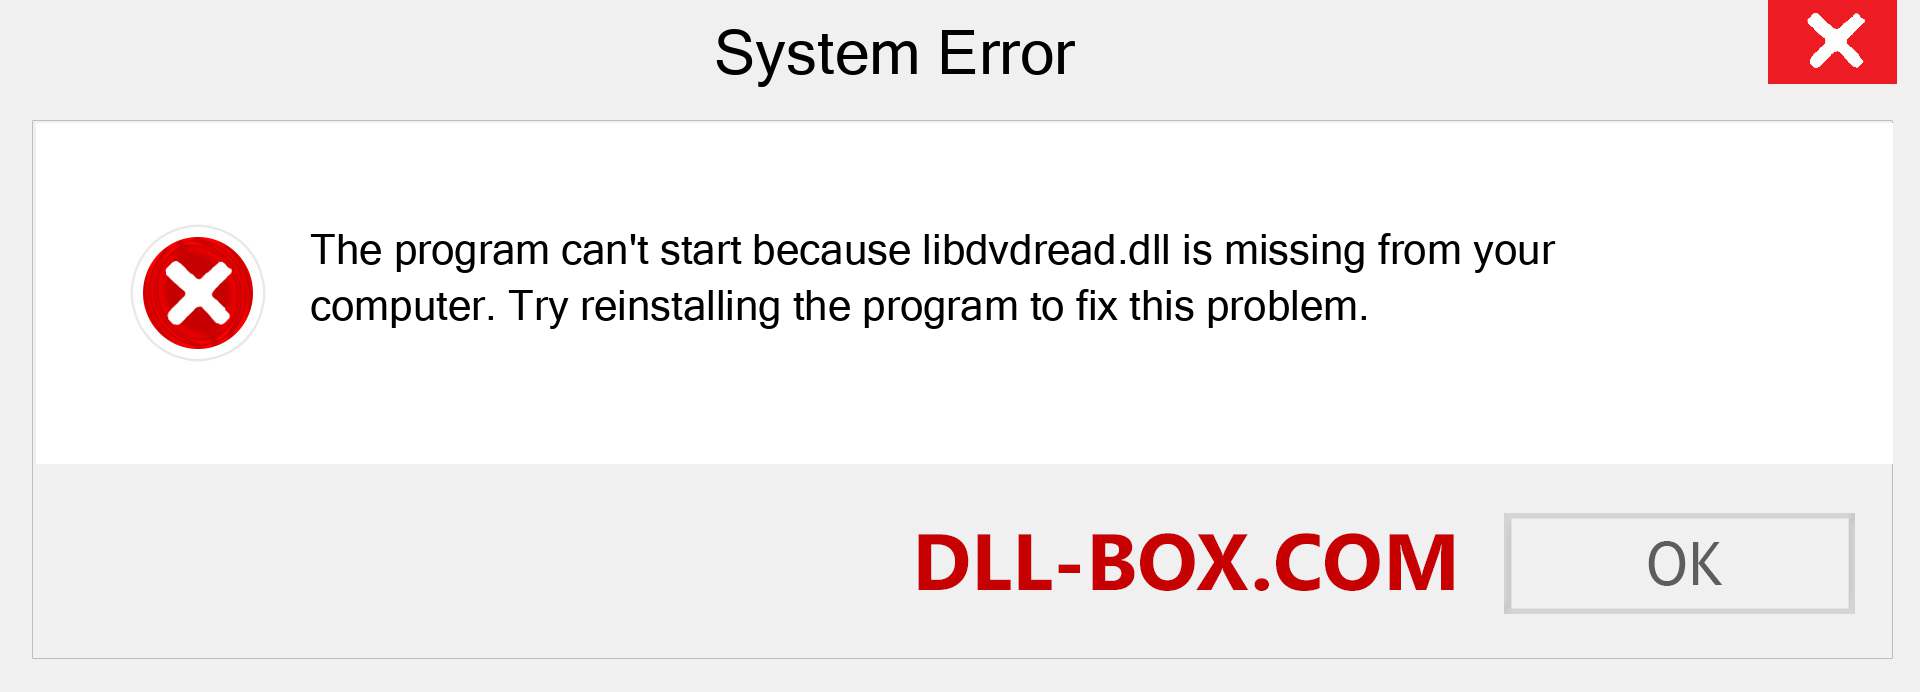  libdvdread.dll file is missing?. Download for Windows 7, 8, 10 - Fix  libdvdread dll Missing Error on Windows, photos, images